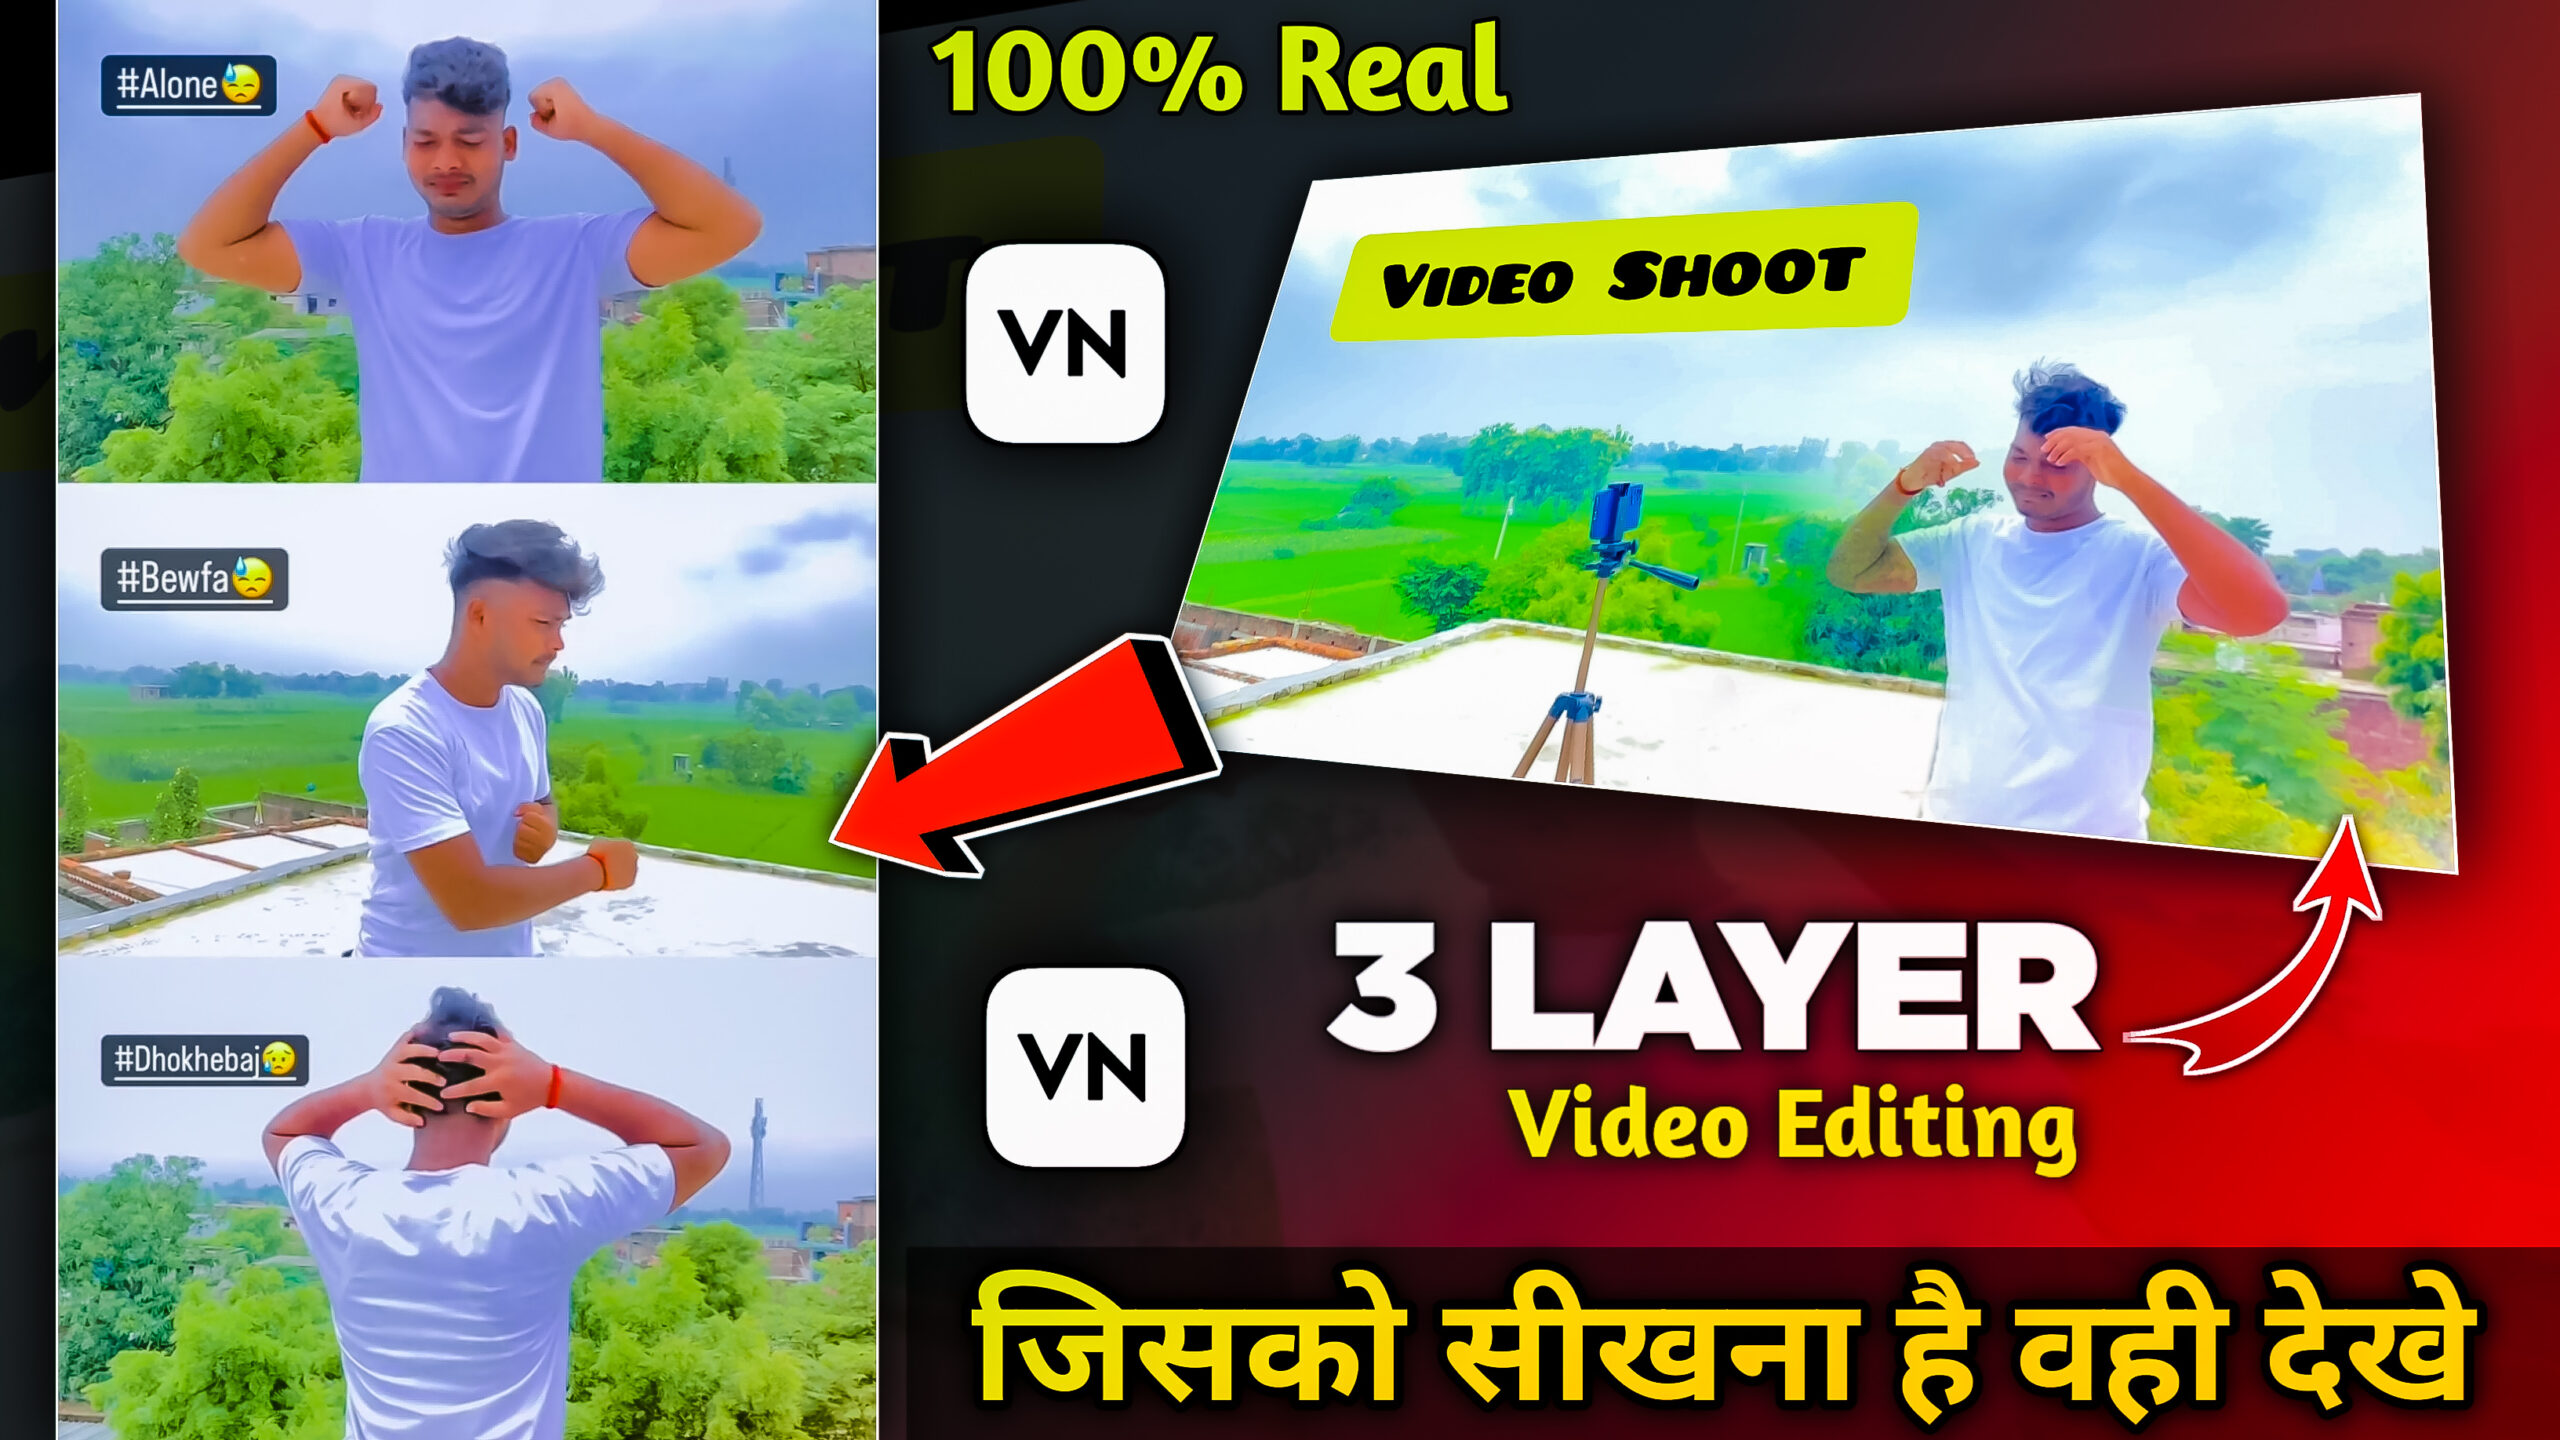 3 Layer Video Editing In VN App Download All Material